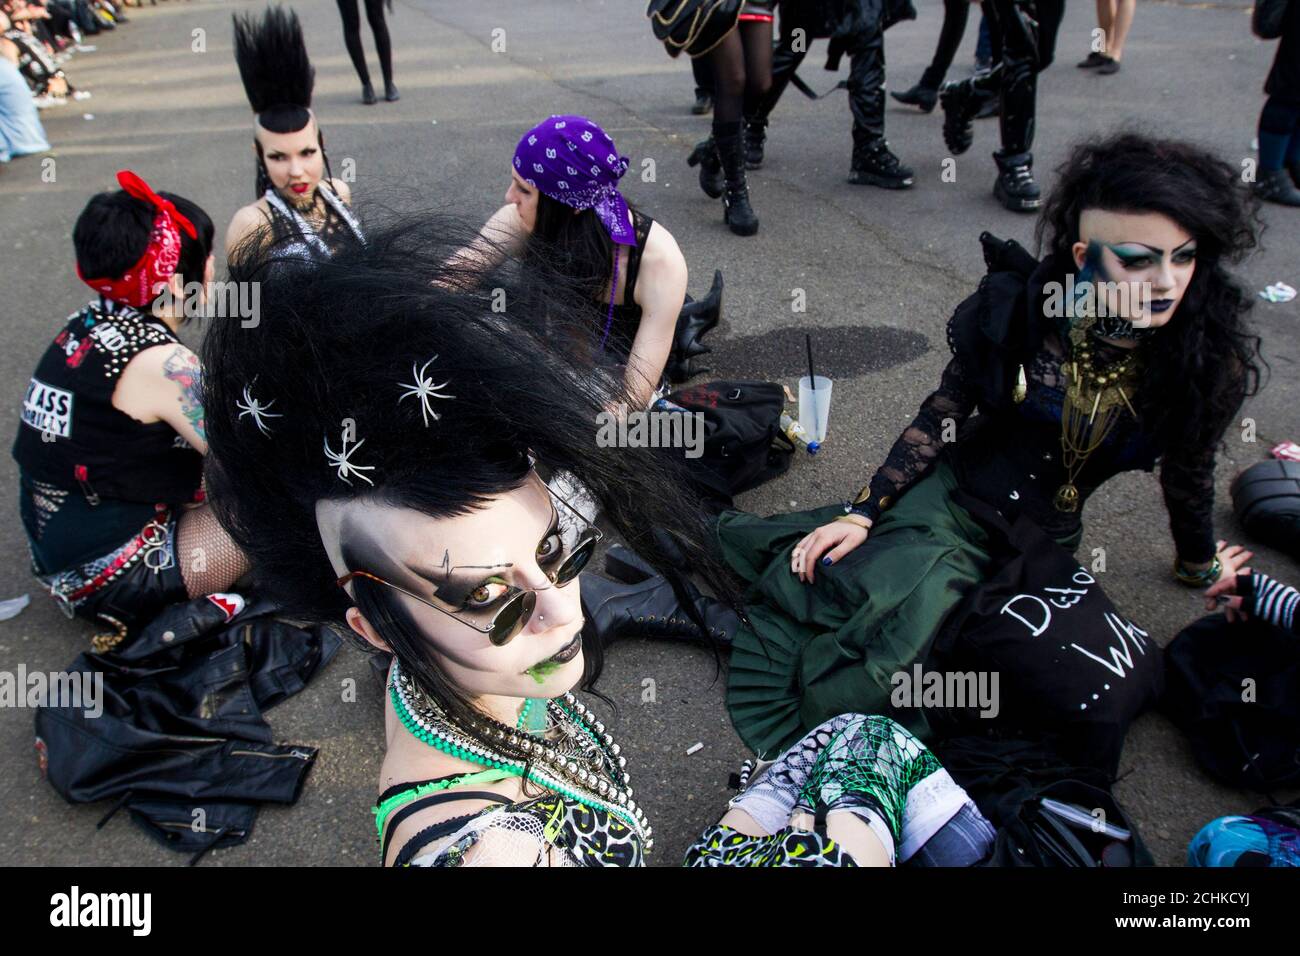 Revellers in their subculture attire sit on the pavement outside of a venue of the Wave and Goth festival in Leipzig May 26, 2012. The annual festival, known in Germany as Wave-Gotik Treffen, features over 150 bands and artist in venues all over the city playing Gothic rock and other styles of the dark wave music subculture. The event that counts as one of the biggest of its kind attracts a regular audience of up to 20,000 the organisers said.  REUTERS/Thomas Peter  (GERMANY - Tags: ENTERTAINMENT TPX IMAGES OF THE DAY) Stock Photo